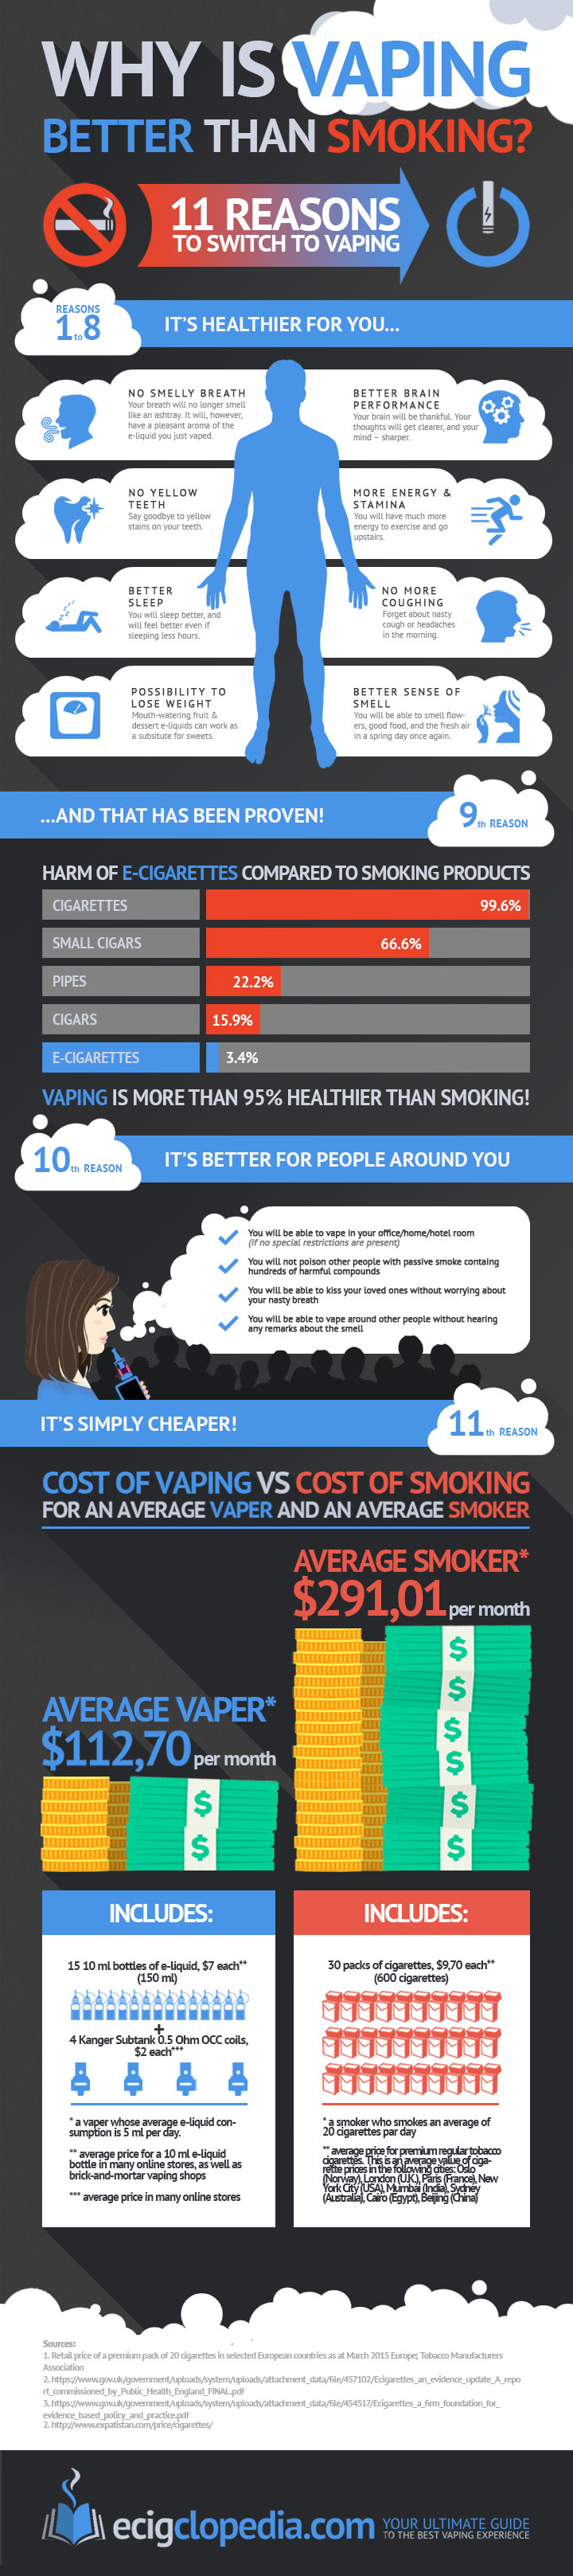 Why Is Vaping Better than Smoking Cigarettes?